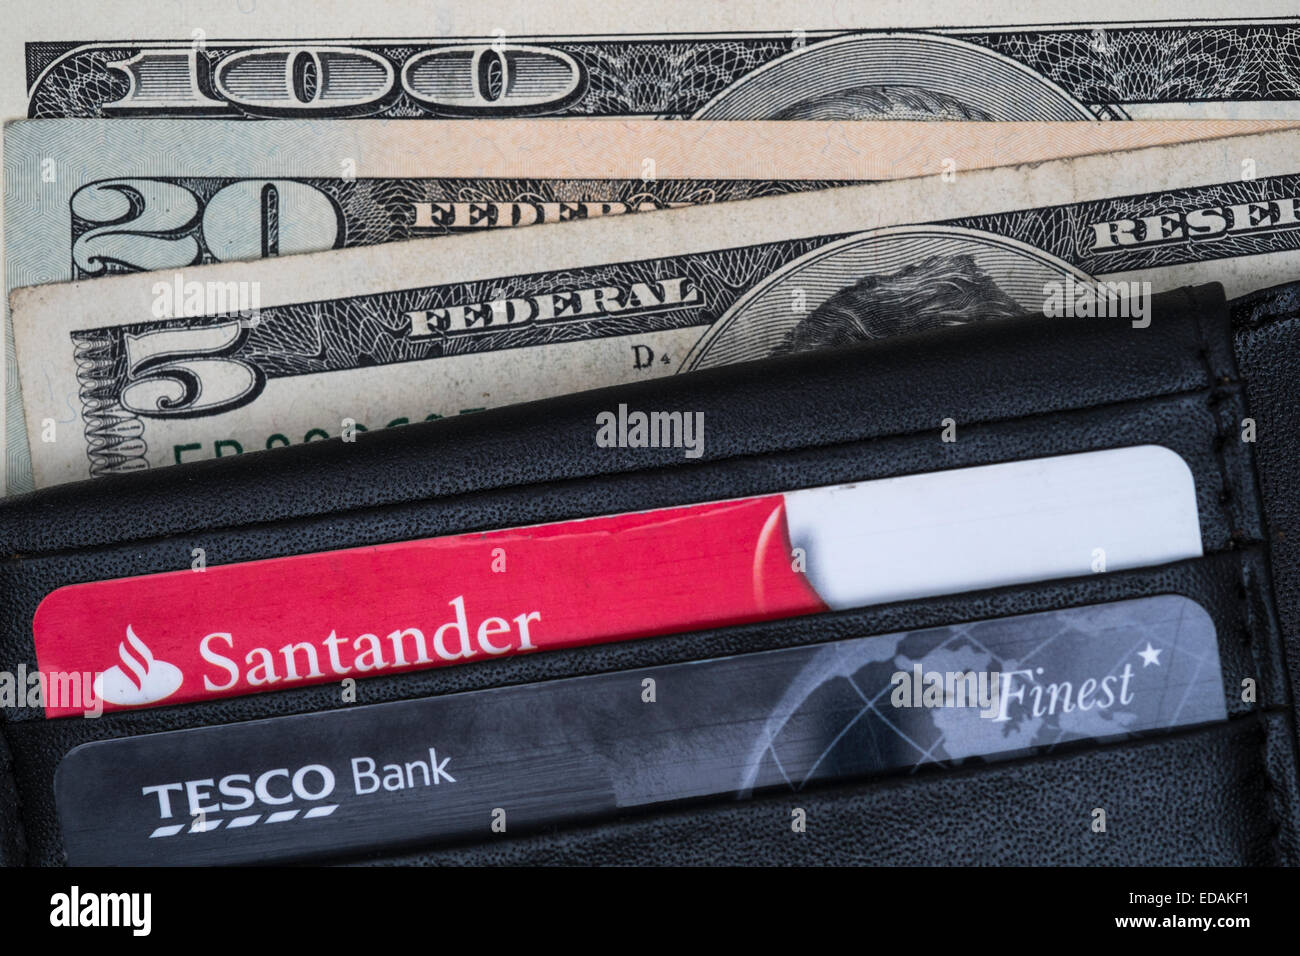 Wallet containing Santander and Tesco bank cards, and american dollars. Stock Photo